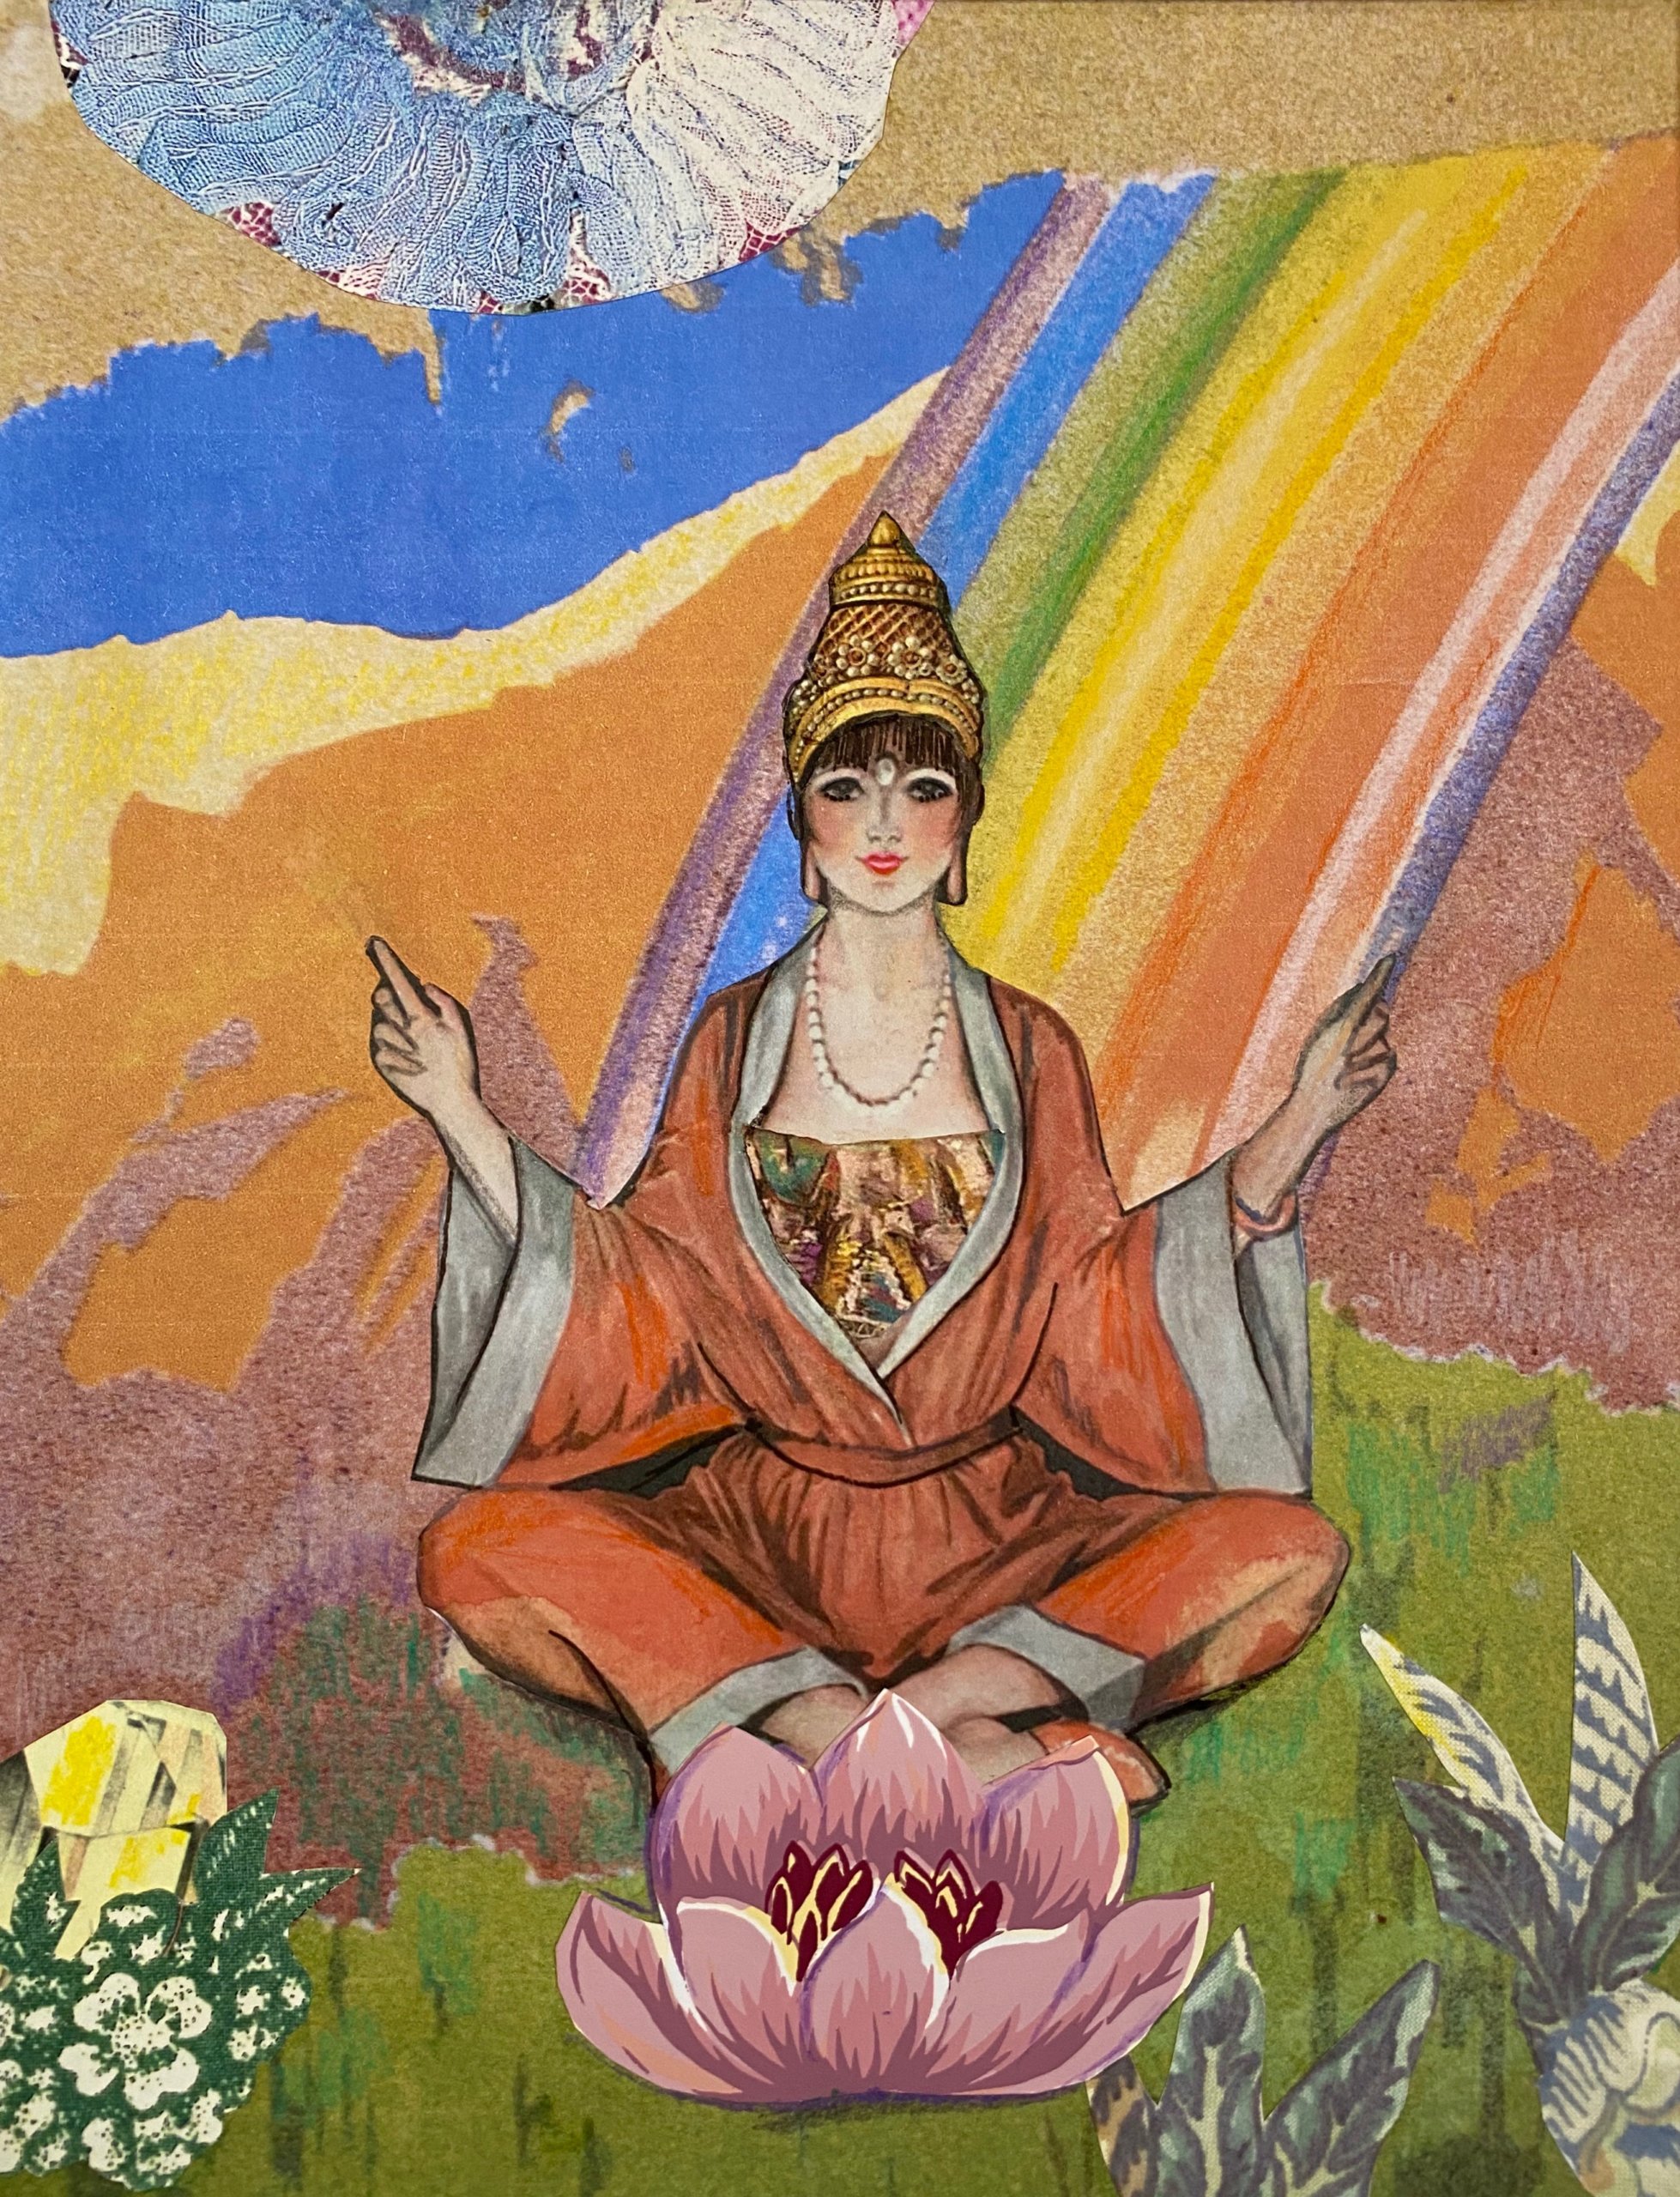 "The Yogini" oracle card from the "Wild Goddess Oracle" by Amy Zerner